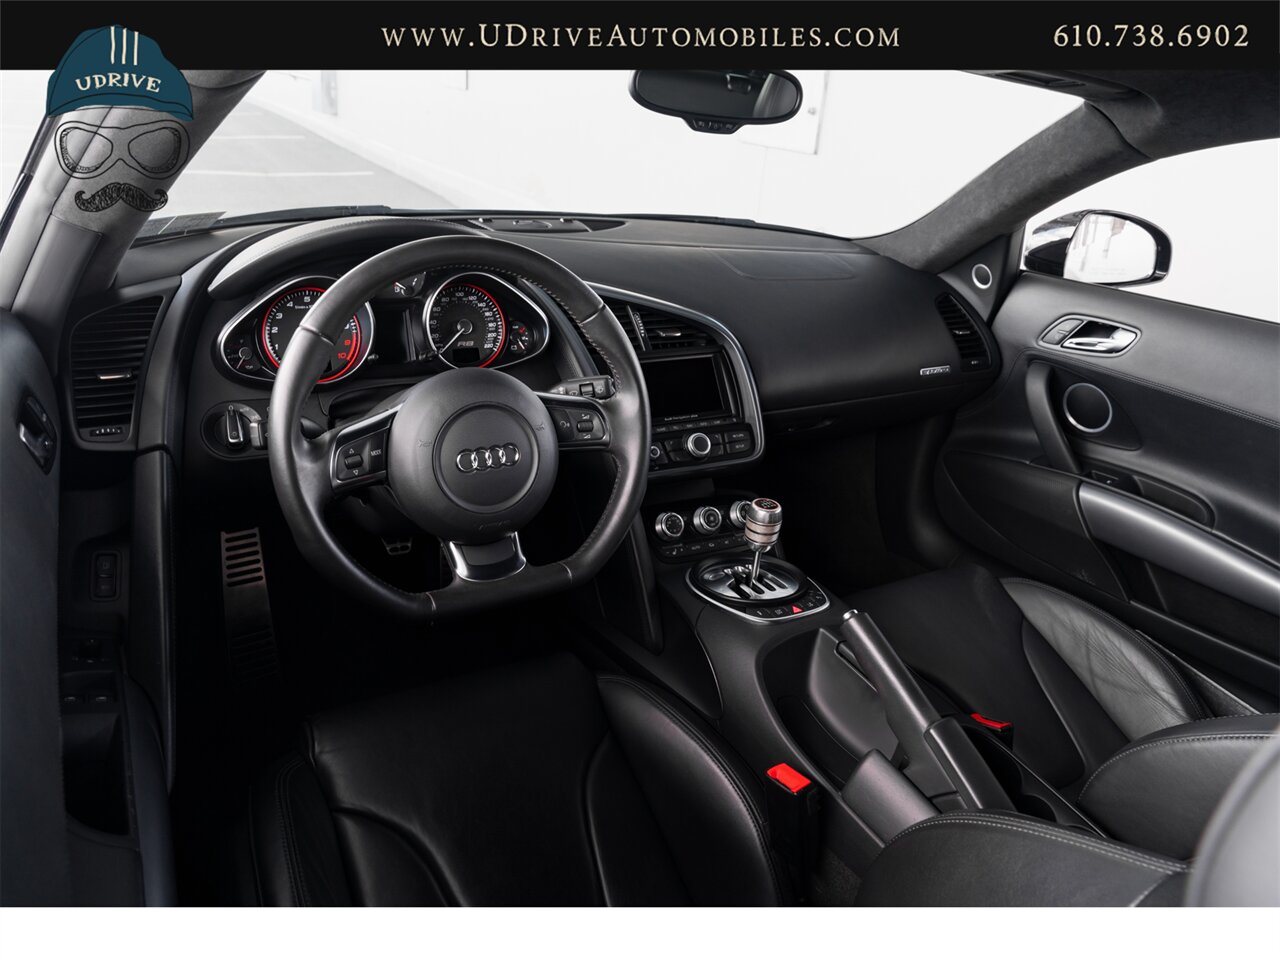 2011 Audi R8 5.2 Quattro  V10 6 Speed Manual - Photo 5 - West Chester, PA 19382